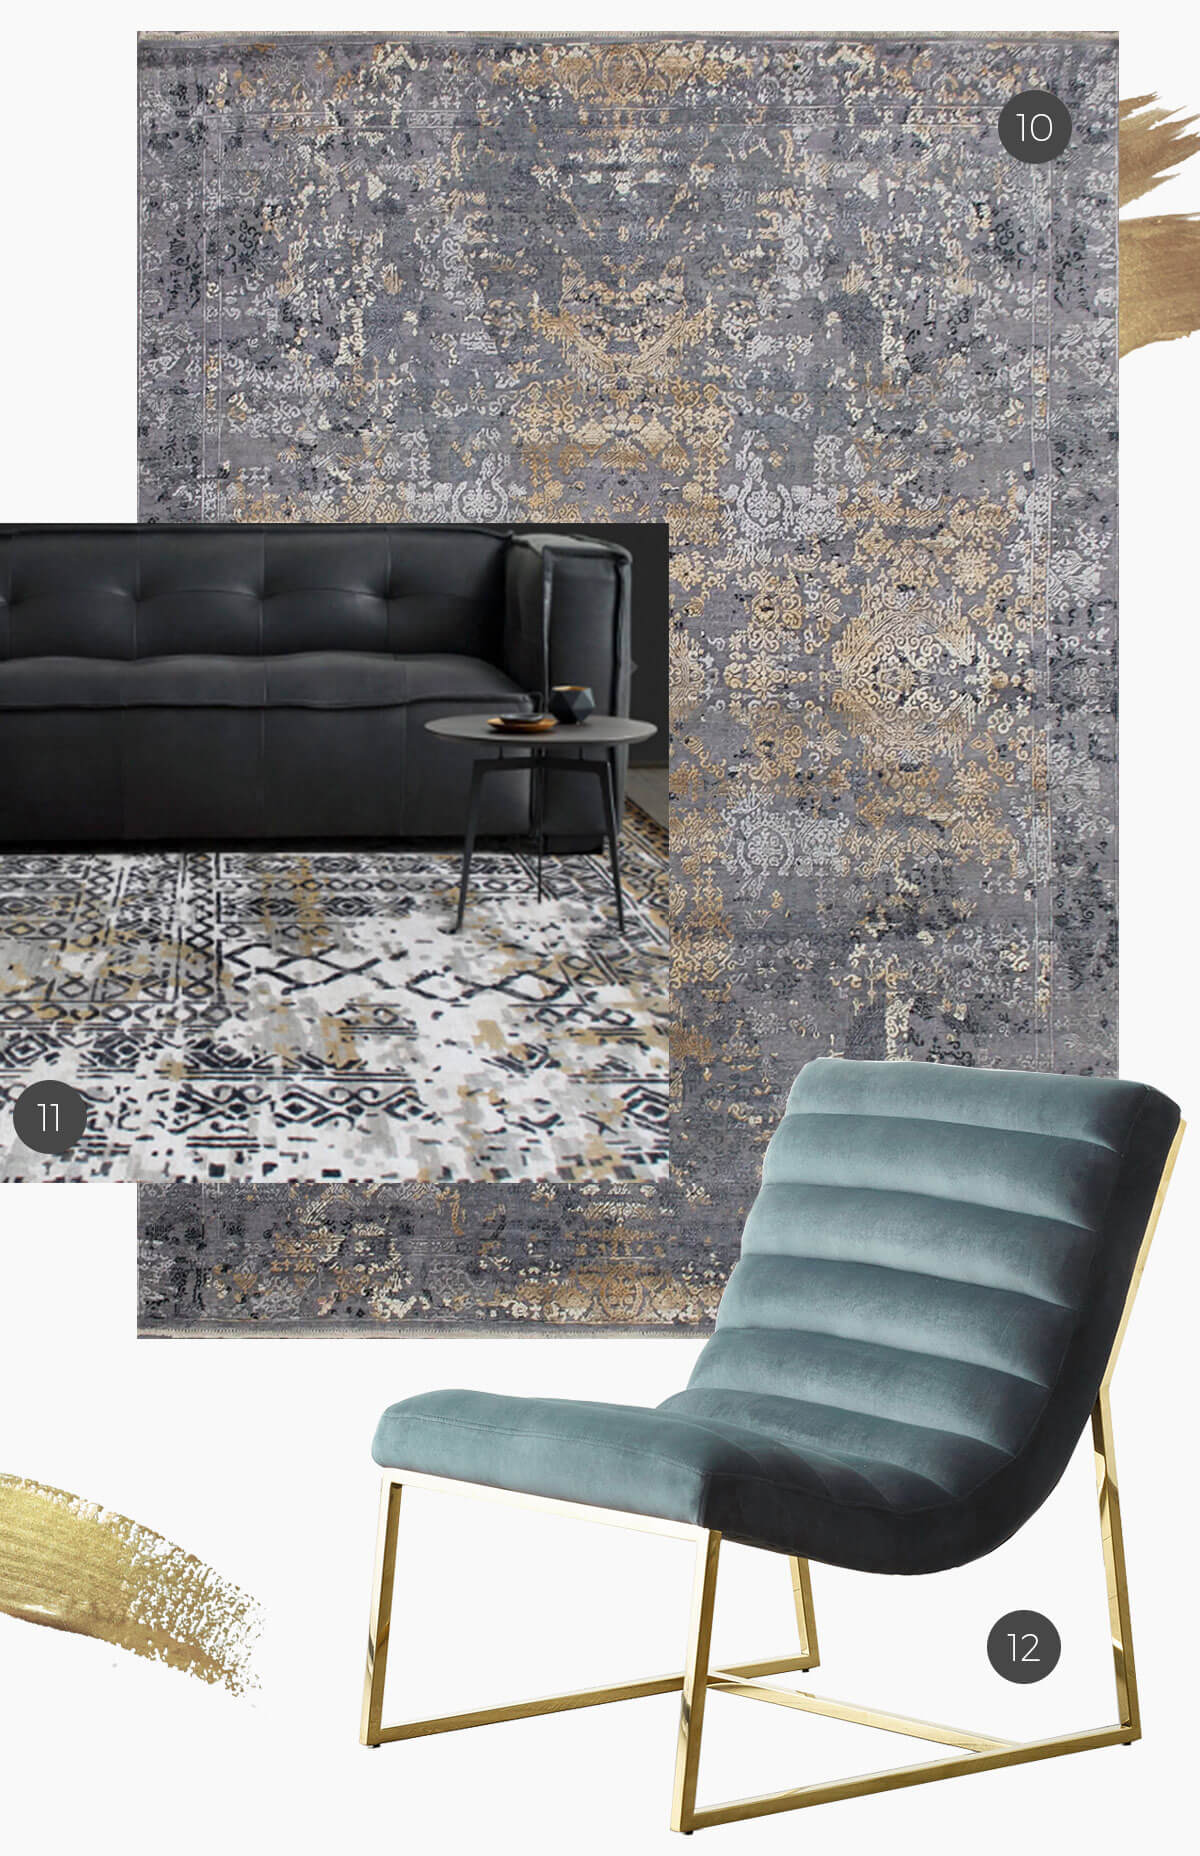 gold accents on rugs and furniture with port velvet chair and winston leather sofa